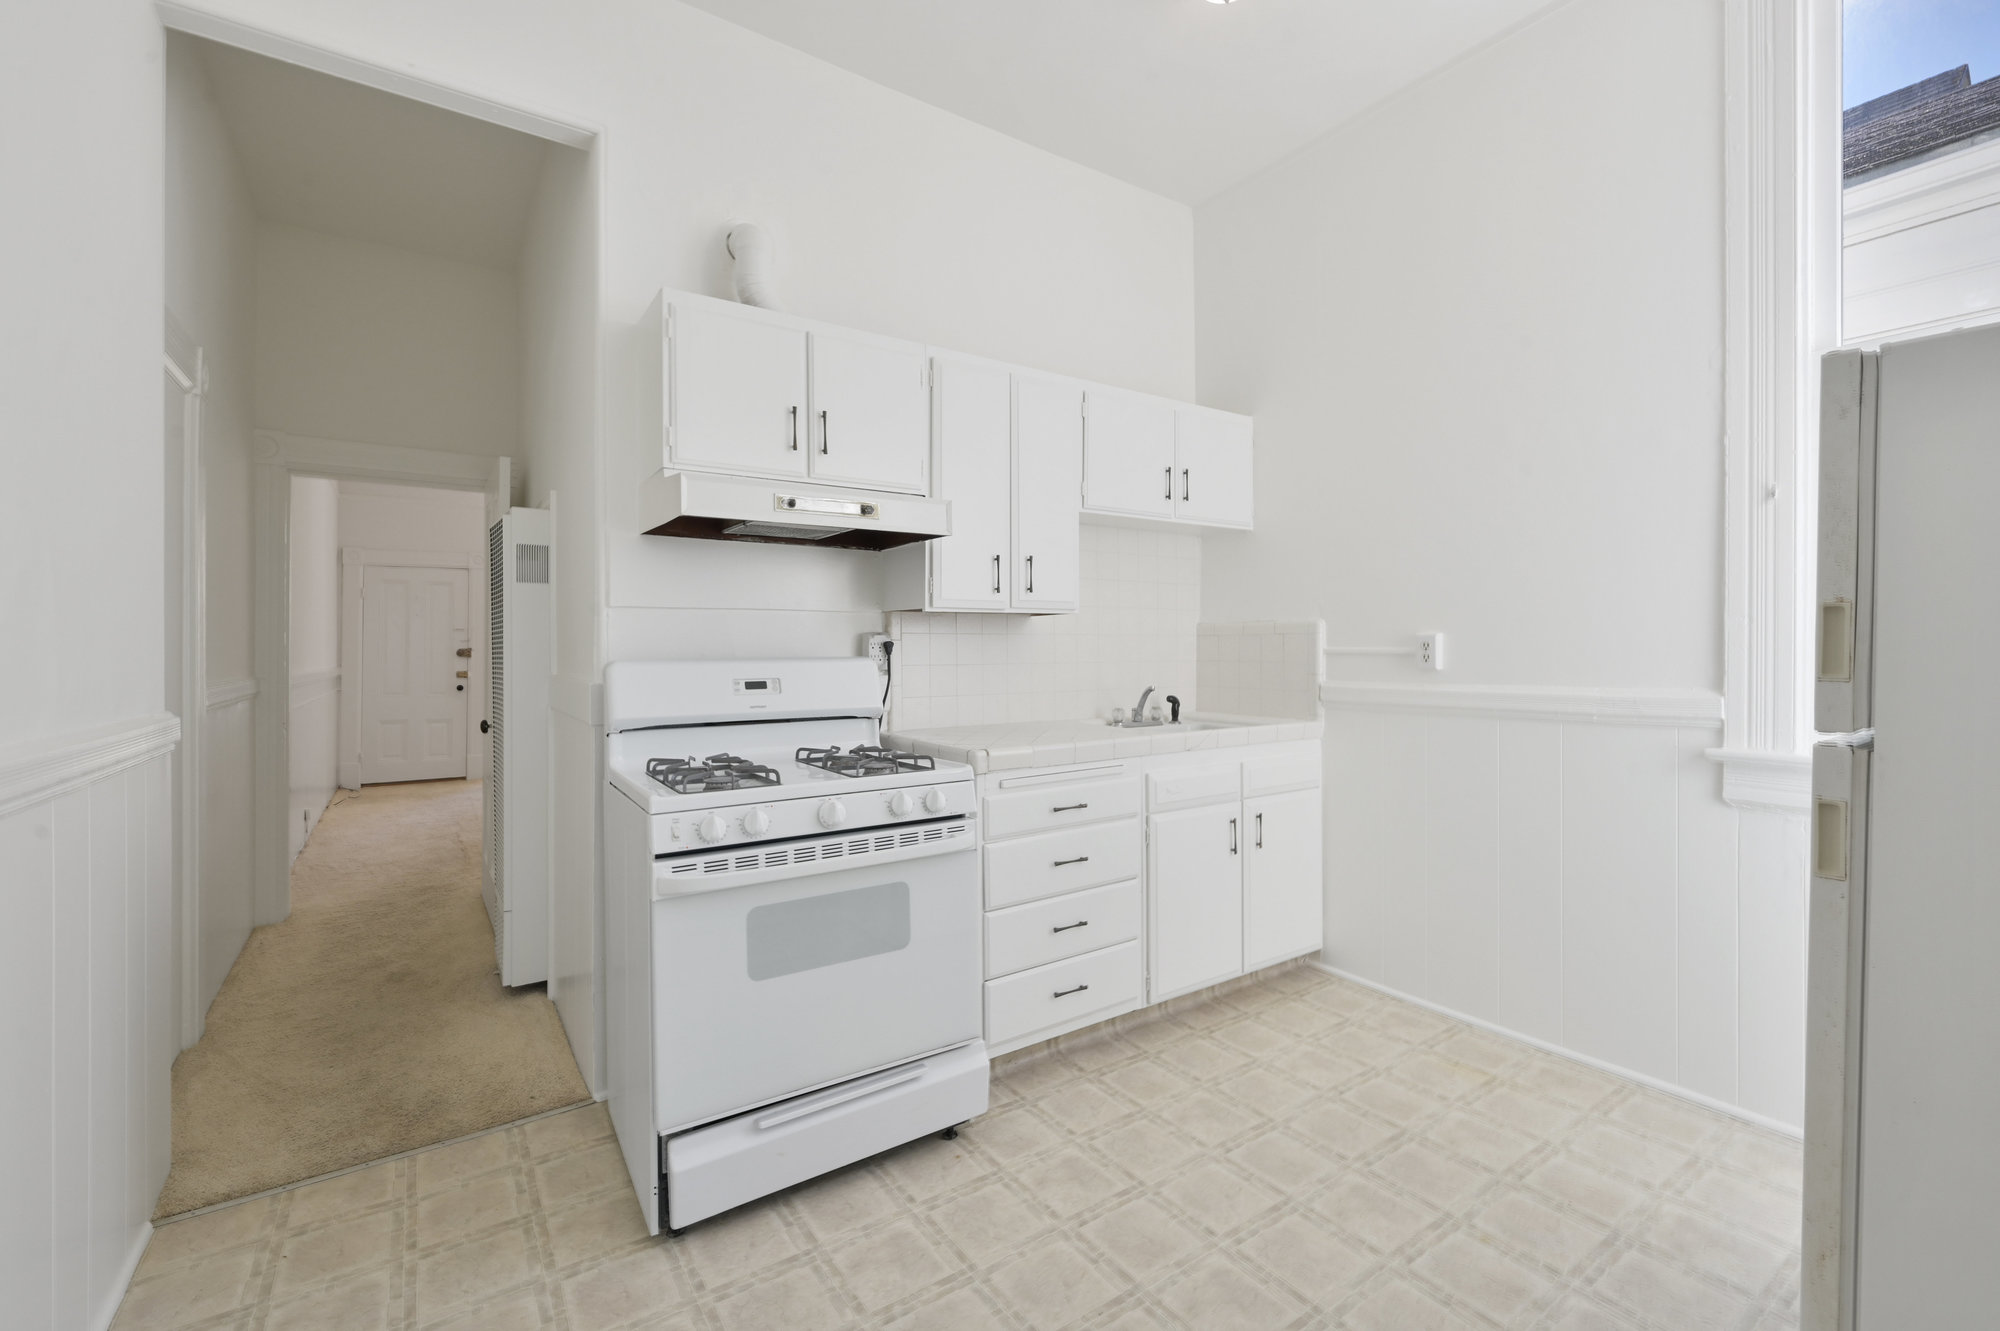 Property Photo: A kitchen with white cabinets and stove